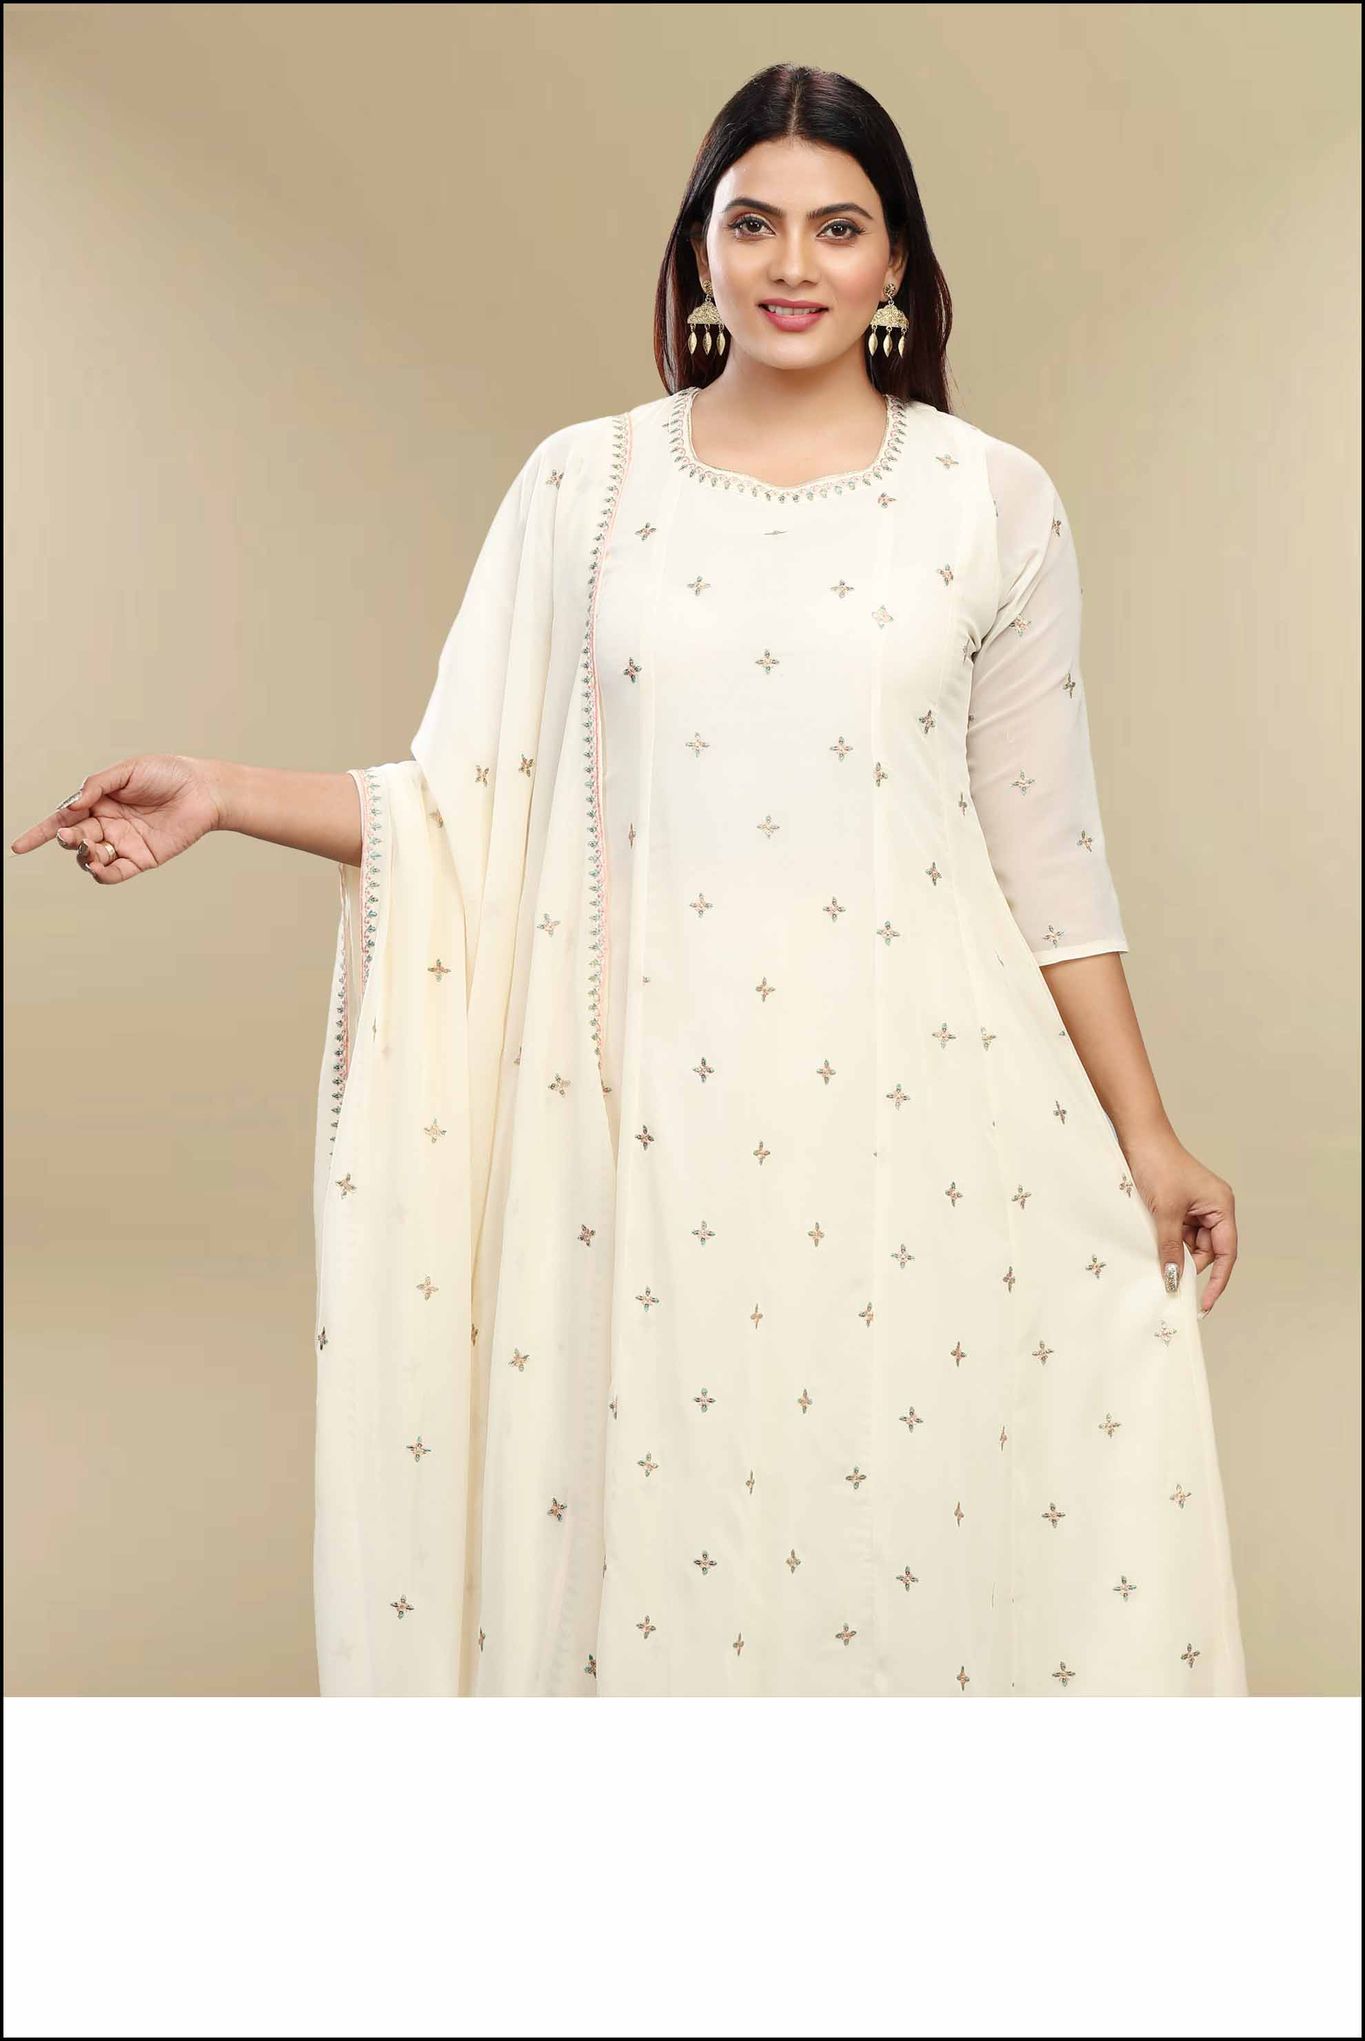 Stitched Kurtas & Kurtis For Women: Buy Stitched Kurtas & Kurtis For Women  Online at Best Prices in India on Snapdeal